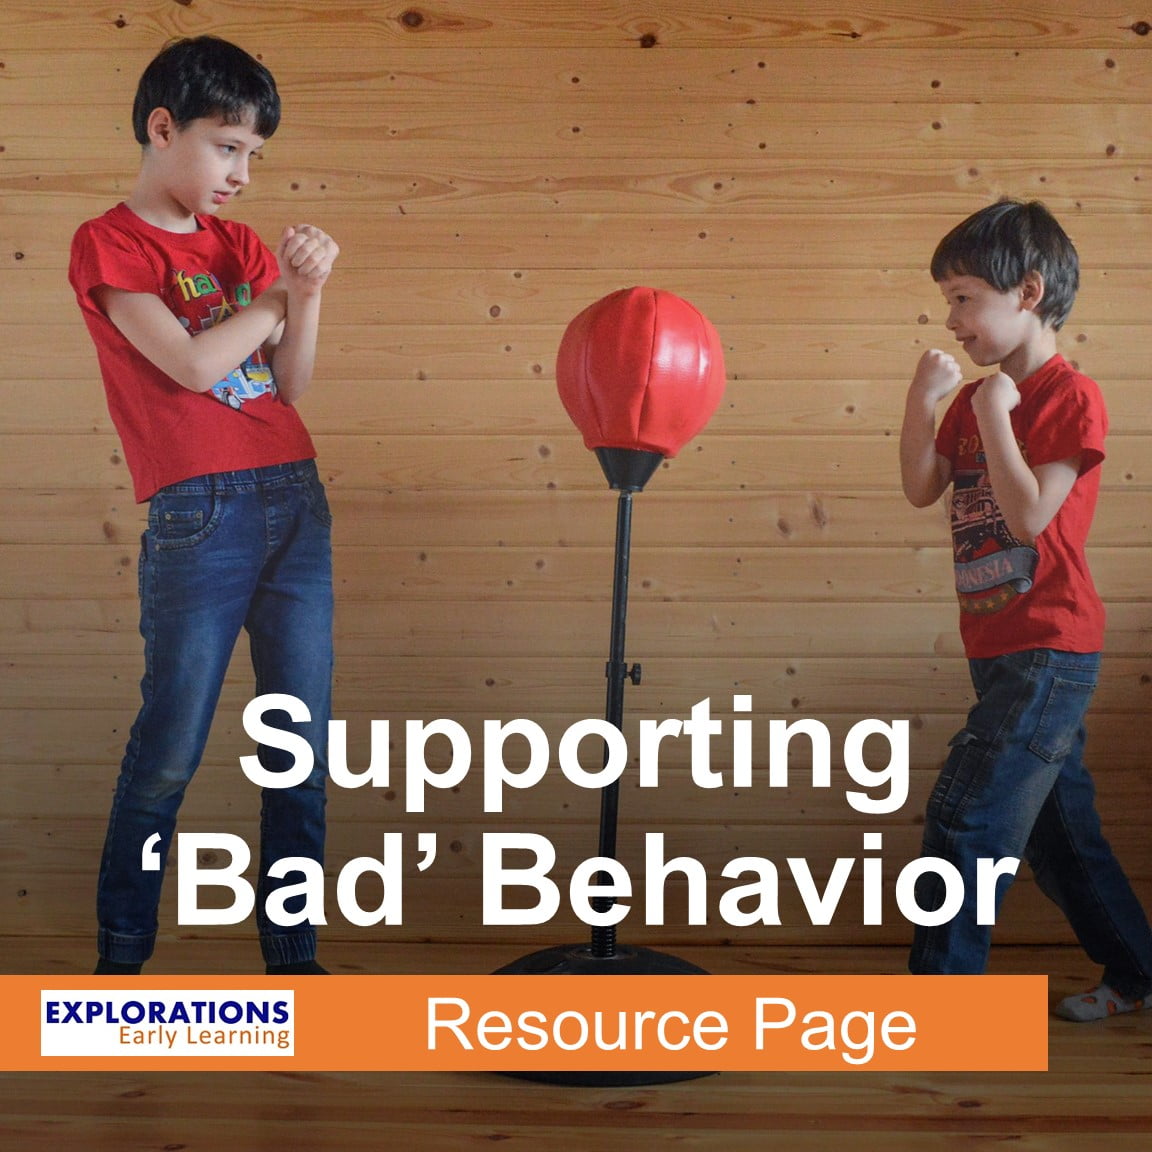 Supporting ‘Bad’ Behavior | Resource Page